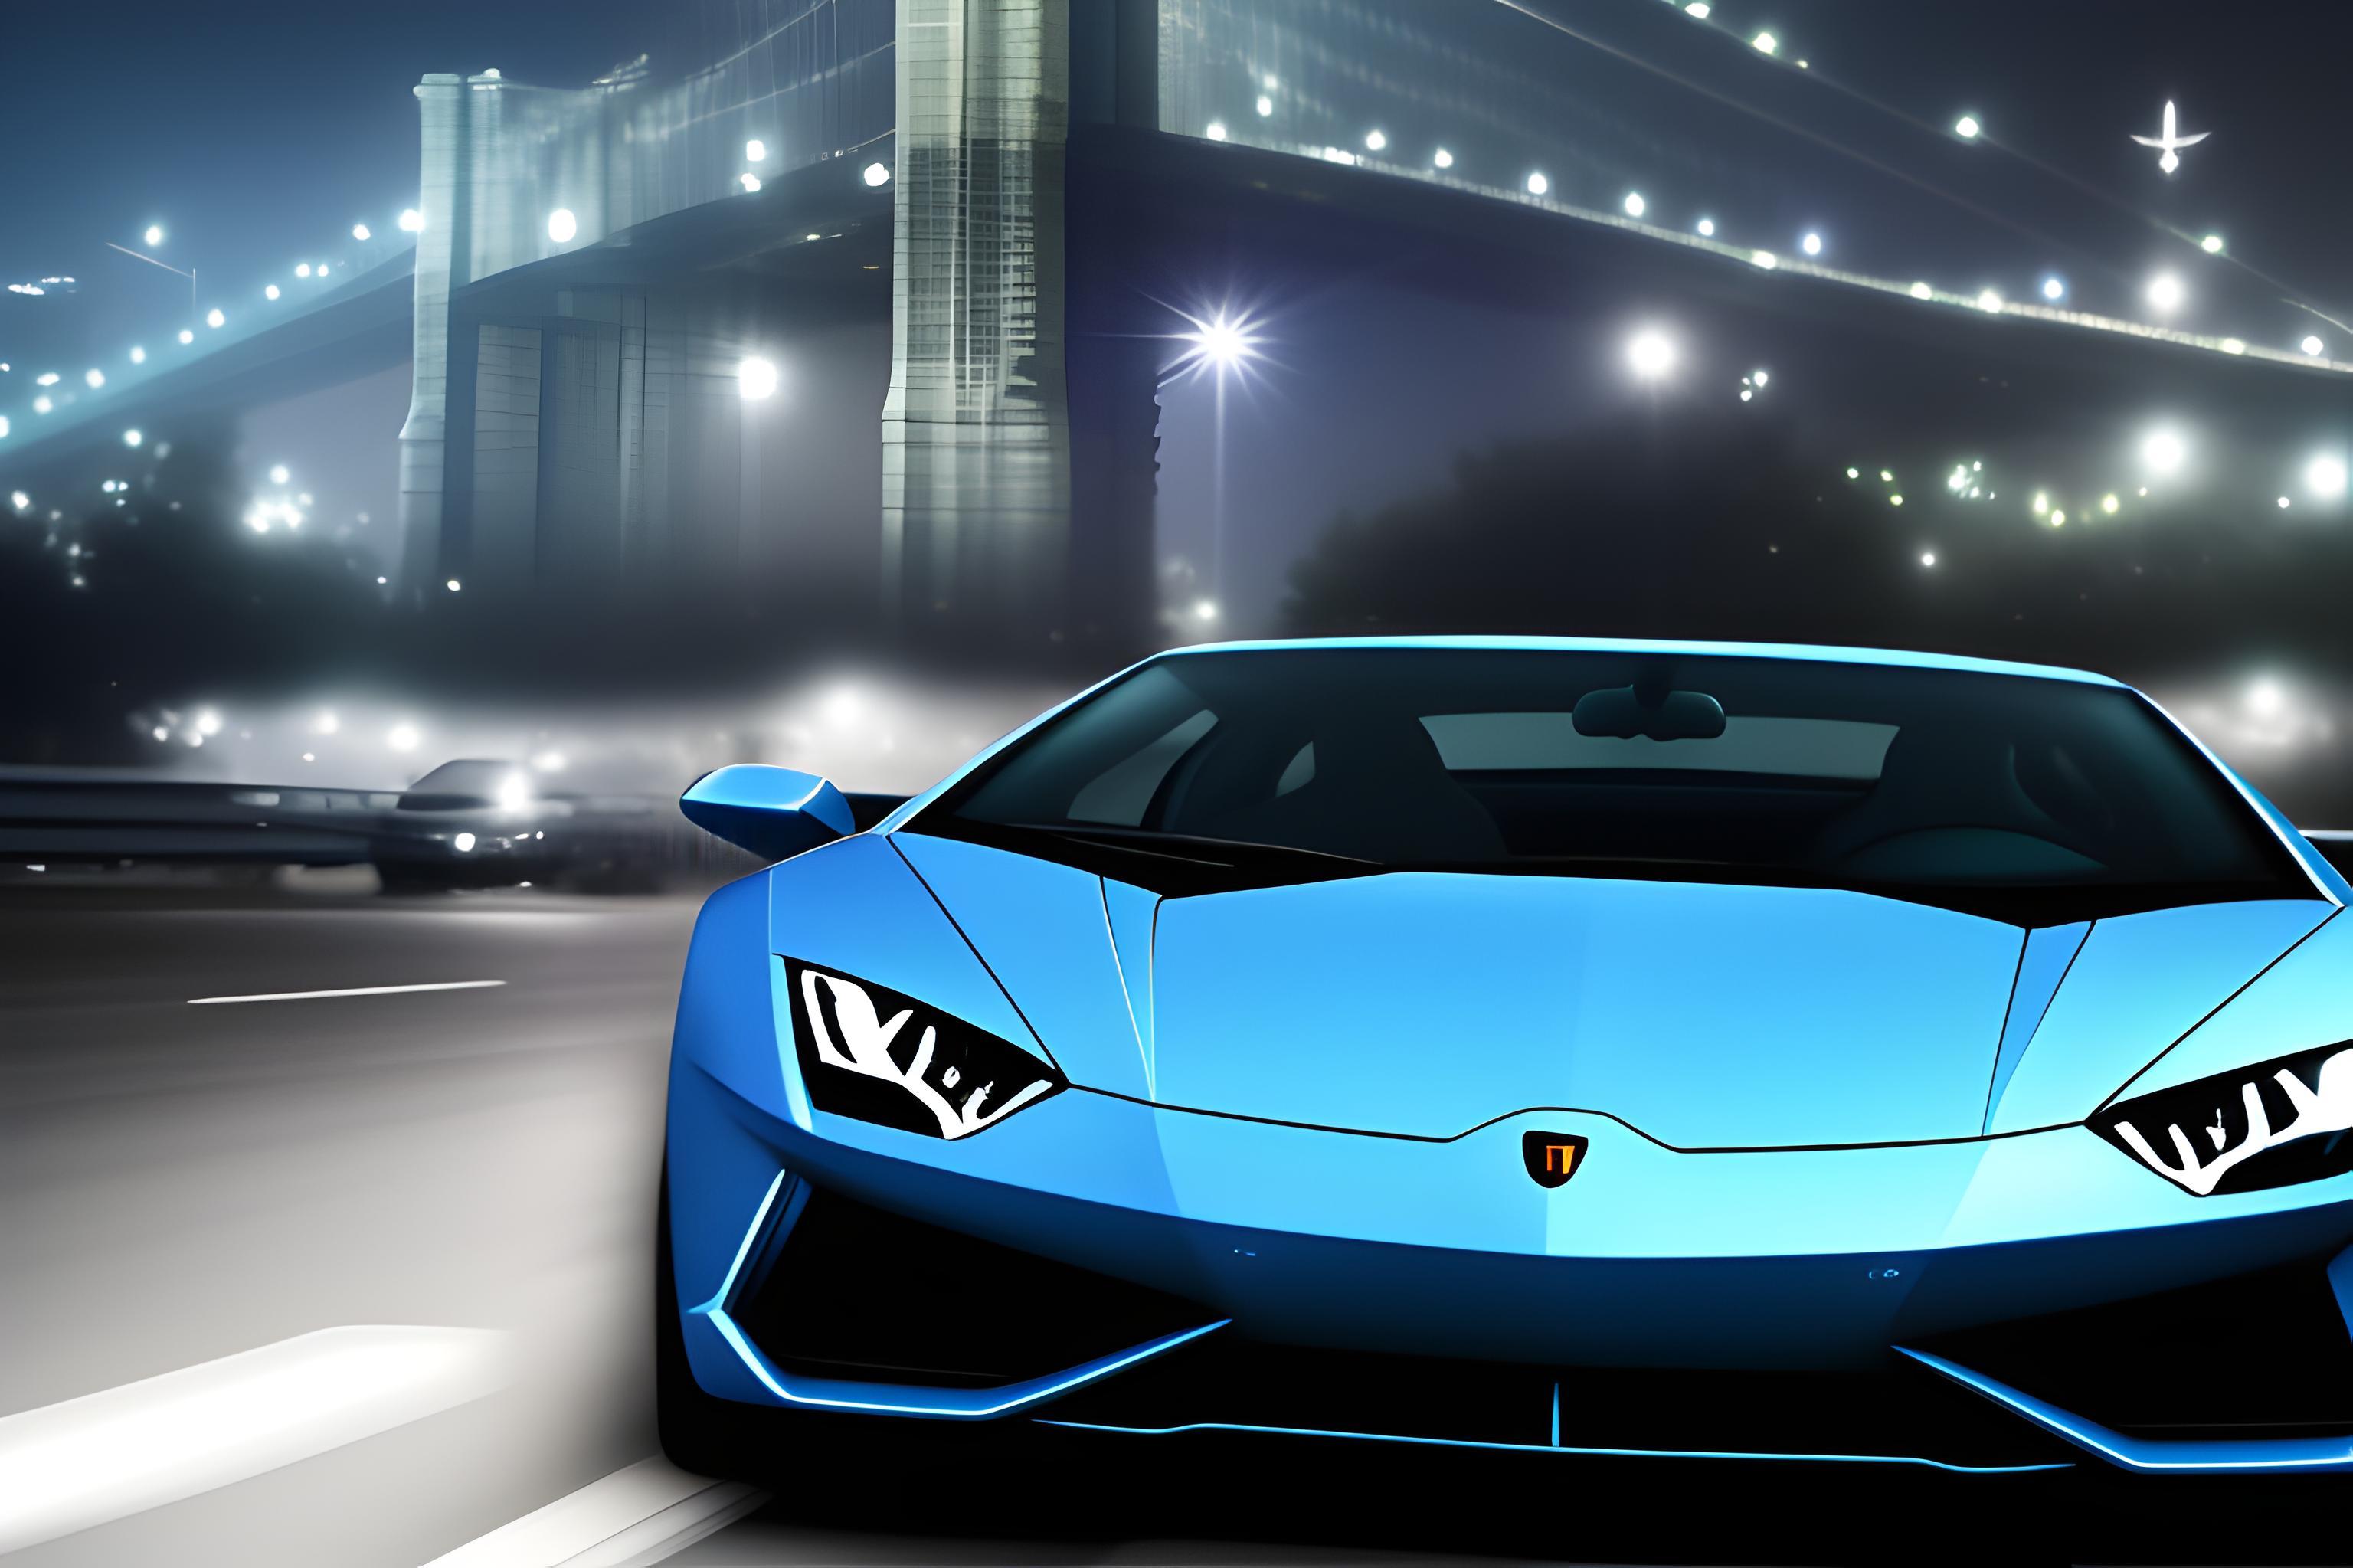 Super Car Lamborghini In Lightblue From Front At Night Time